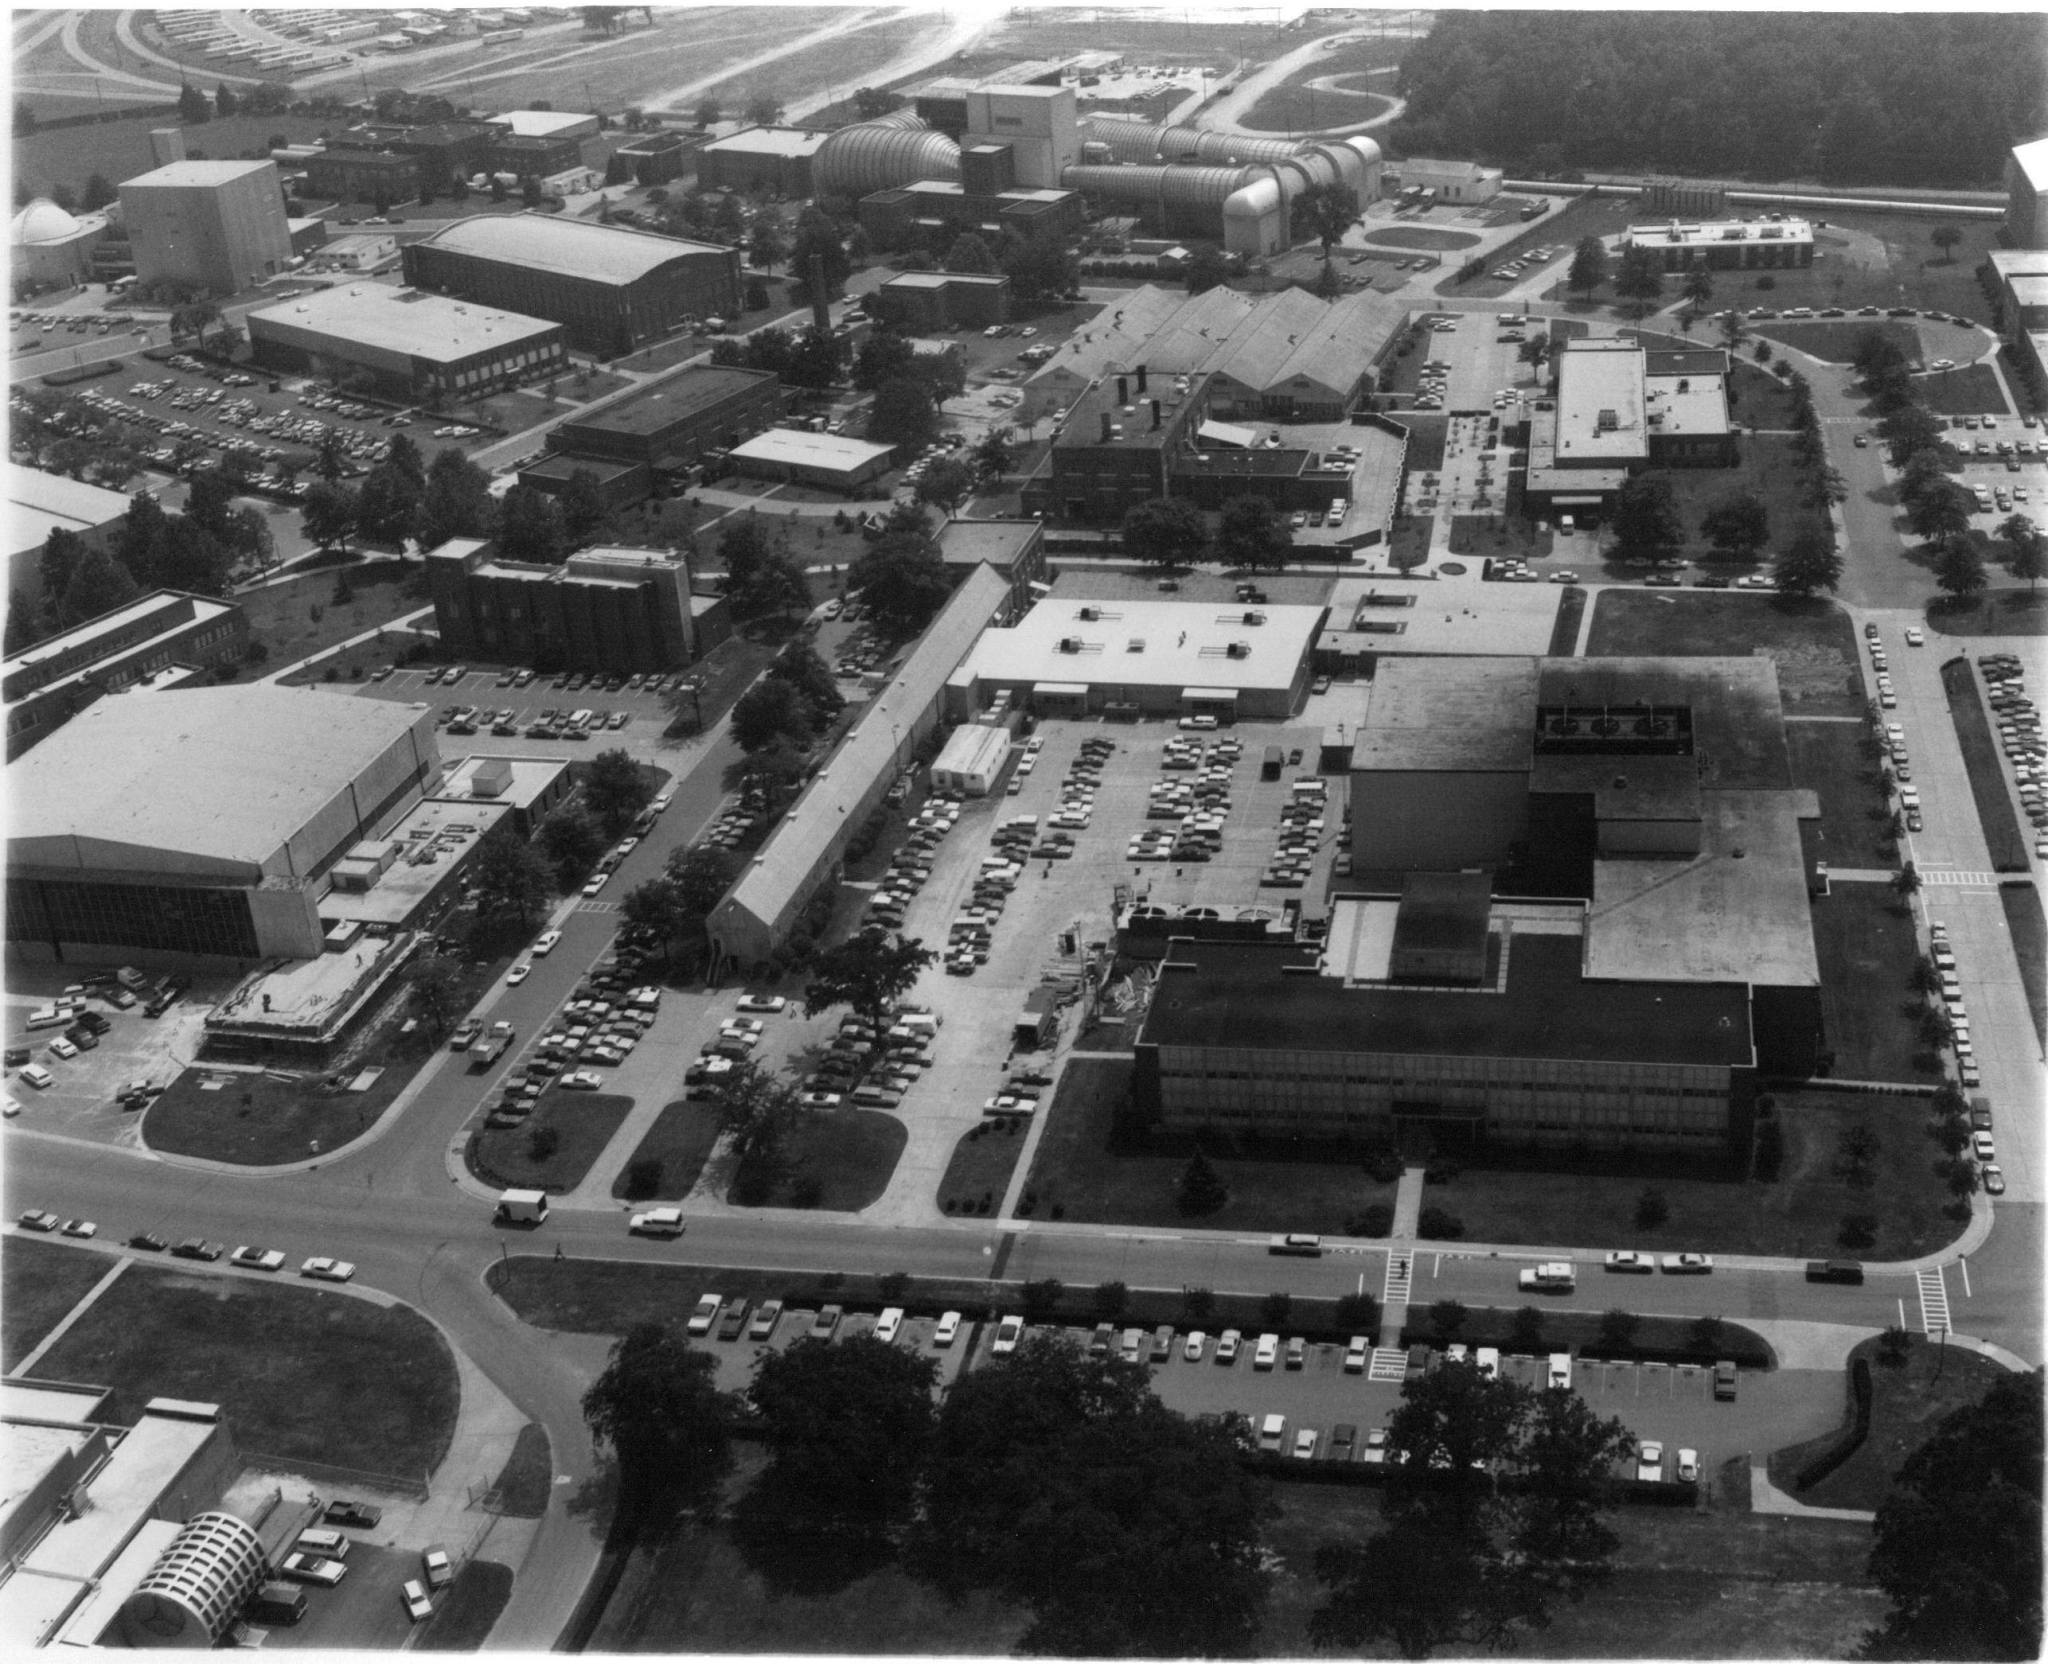 An aerial view, taken sometime between 1968 and 1978, of the Impact Basin, West Model Shop and 16-Foot Tunnel. The long, narrow building in the middle of the photograph is the Impact Basin.